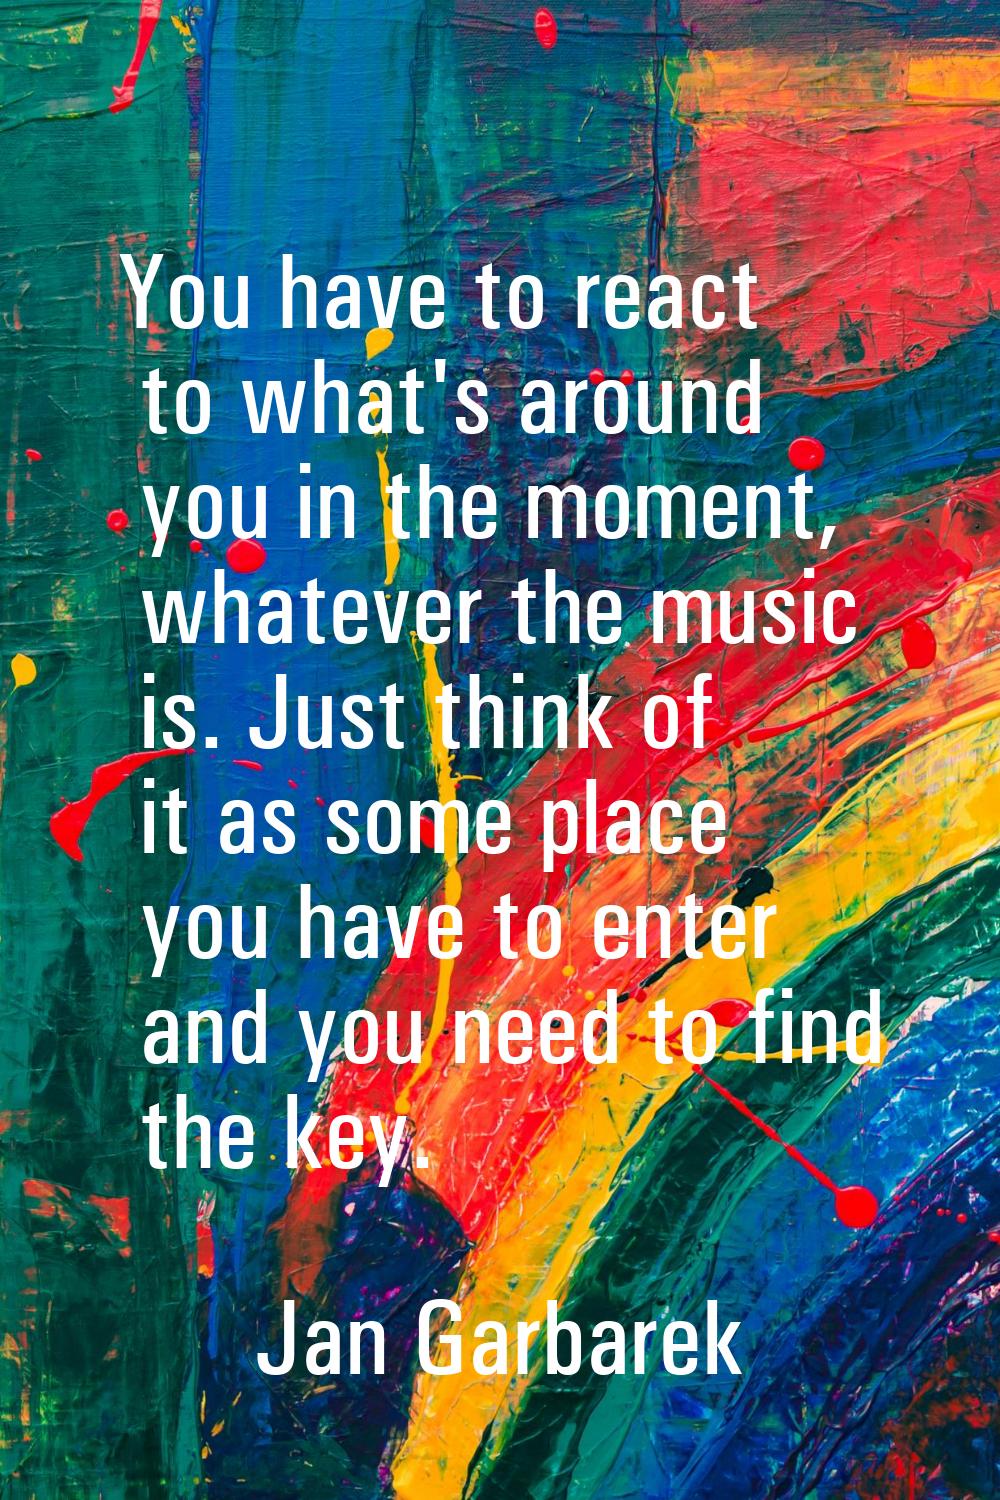 You have to react to what's around you in the moment, whatever the music is. Just think of it as so